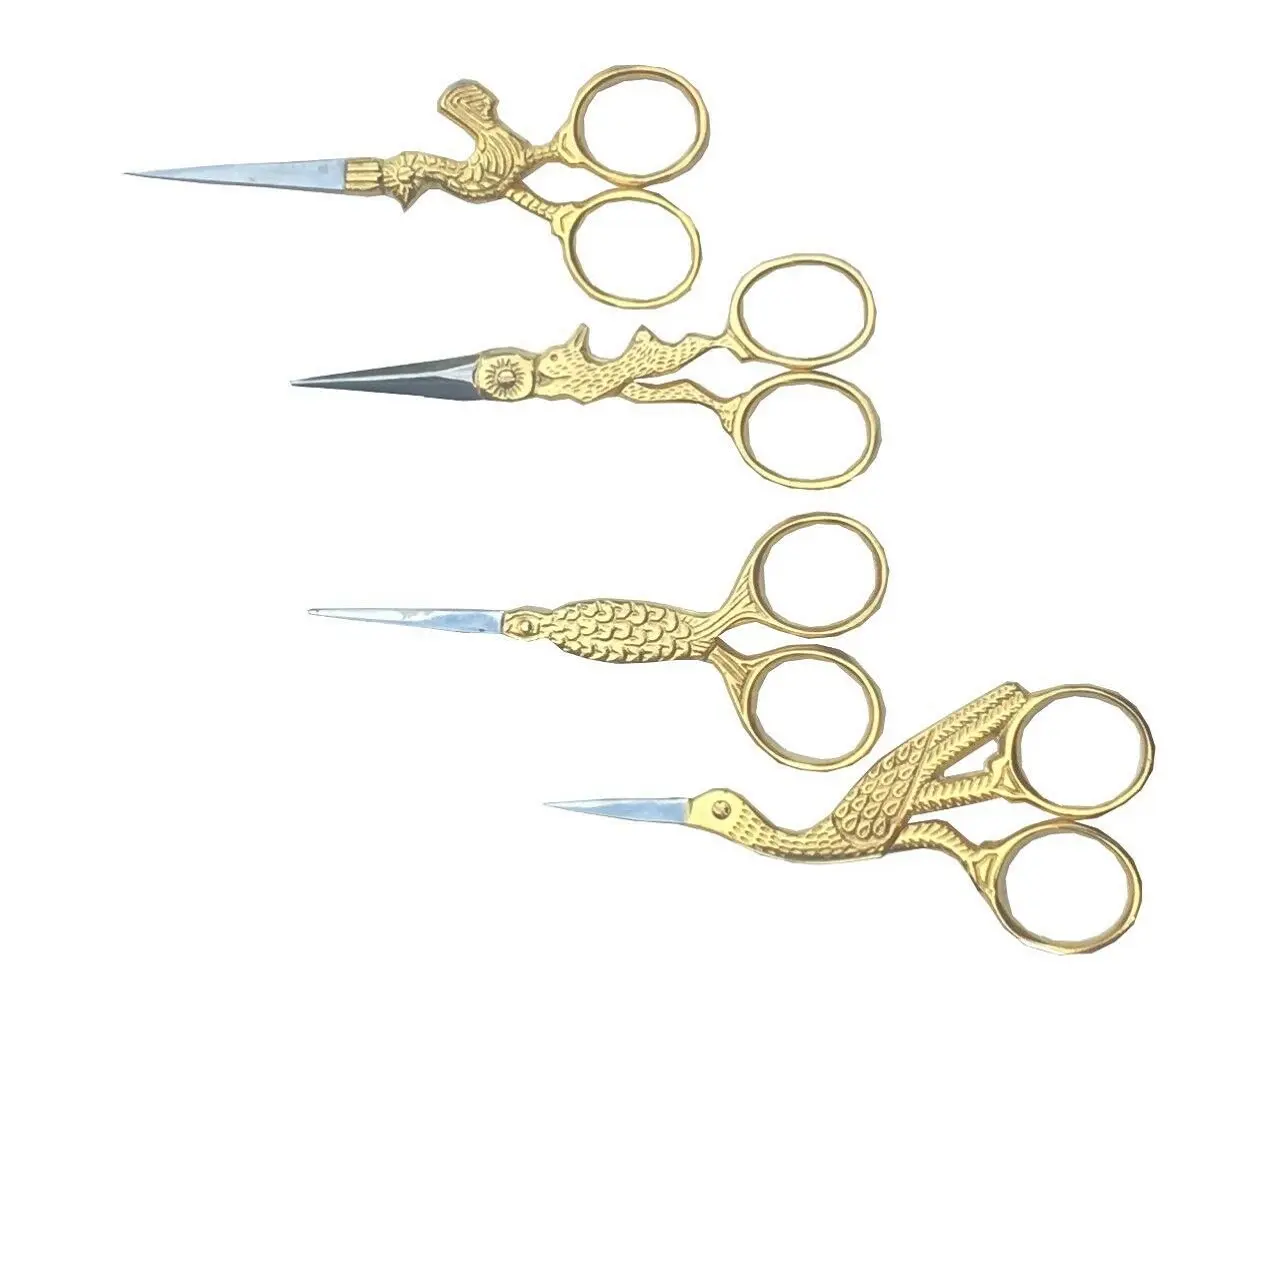 EYEBROW TRIMMING STORK GOLD SCISSORS TWEEZERS EMBROIDERY MANICURE NAIL ART TOOL